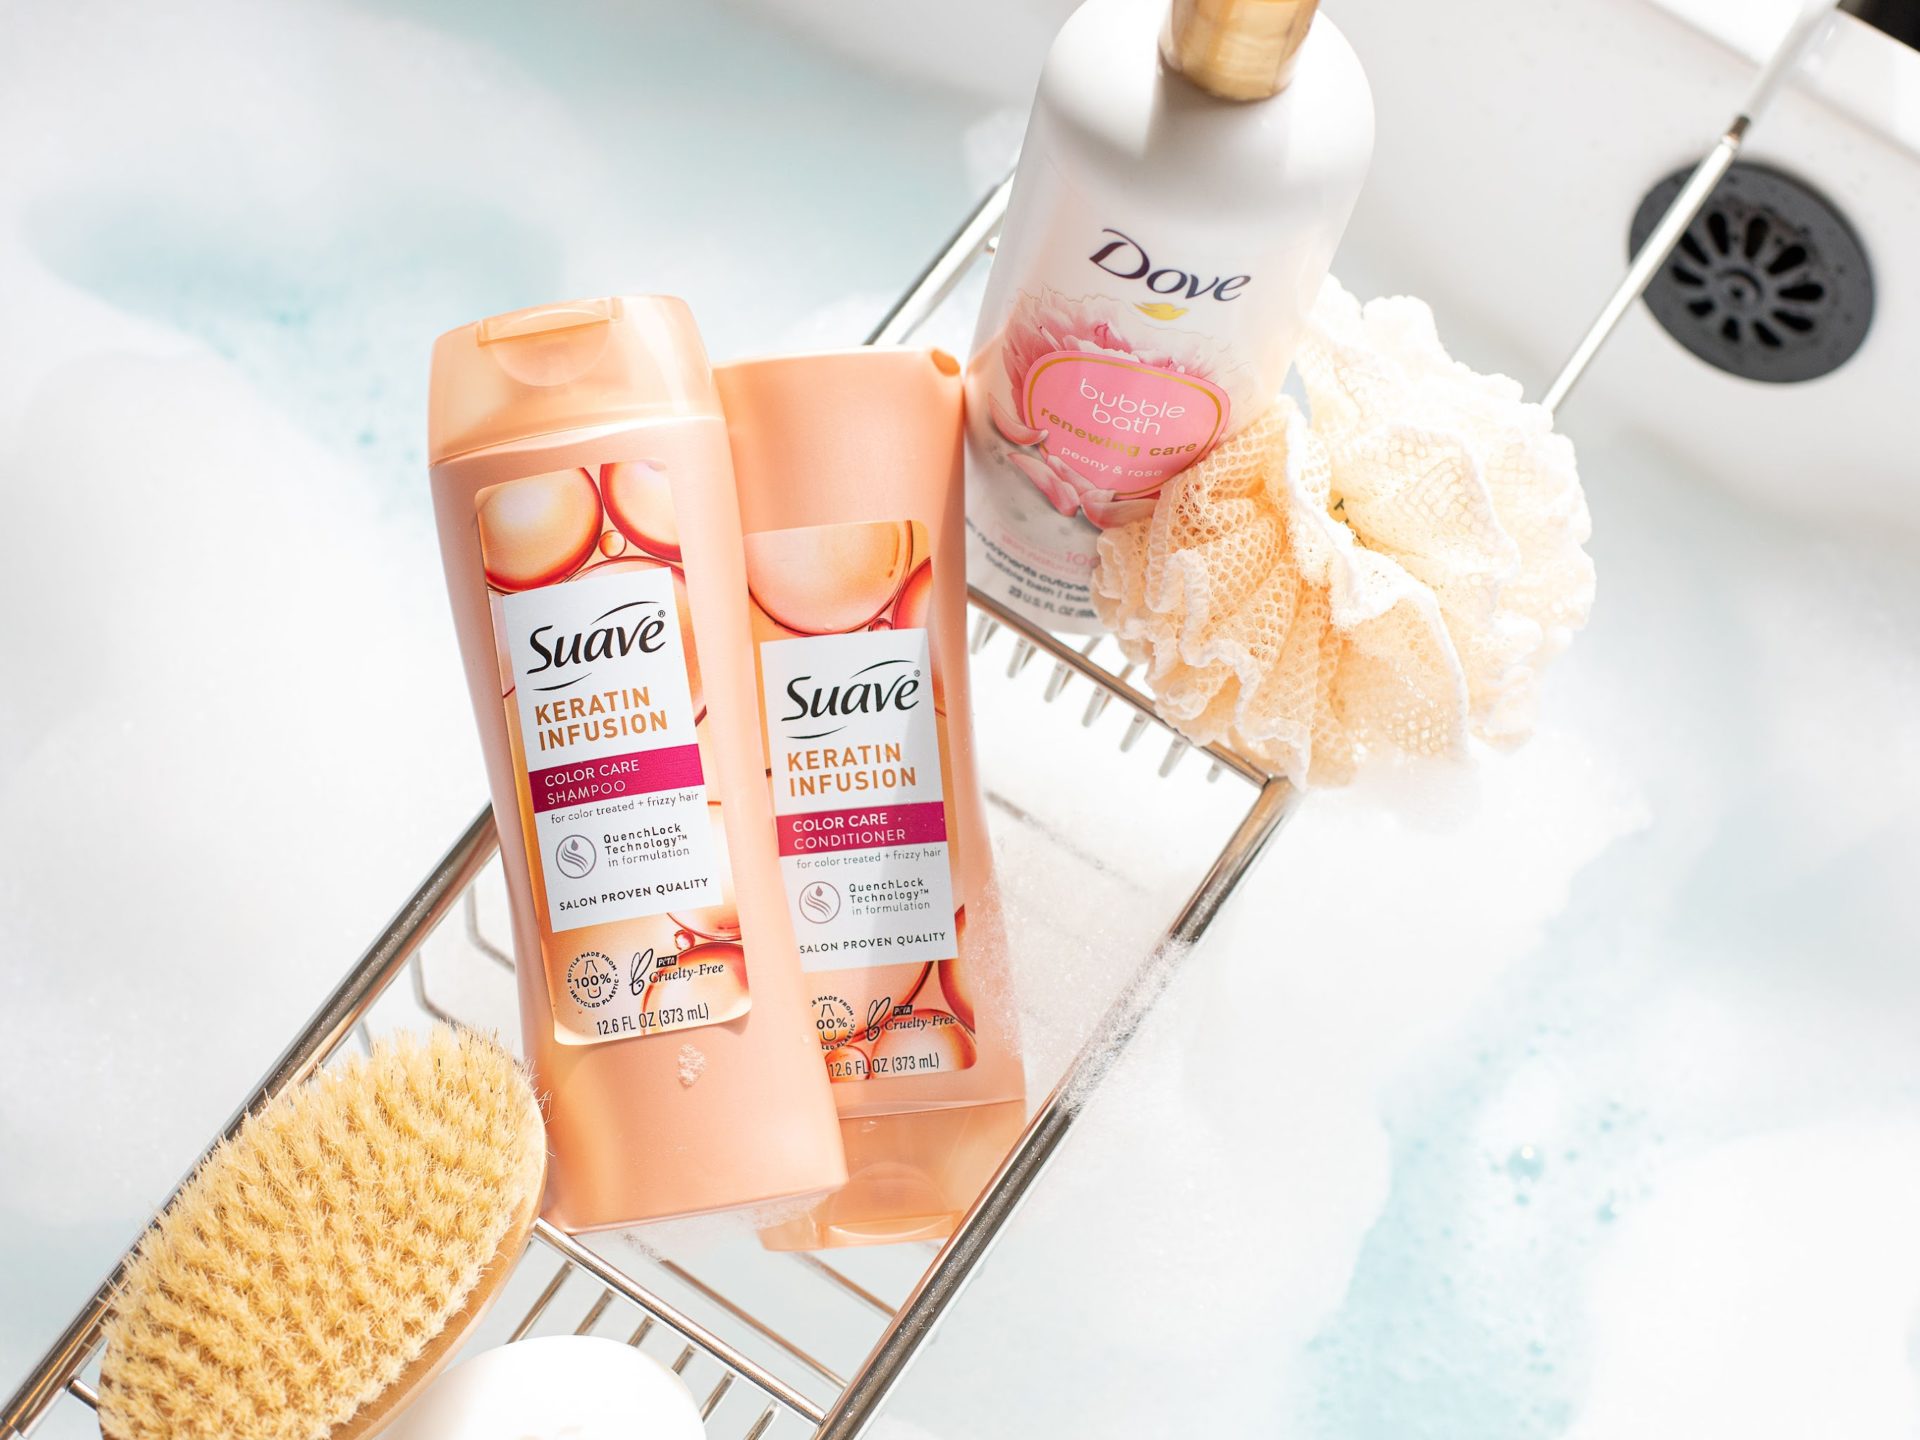 Get Suave Hair Care For As Low As $1.99 At Kroger